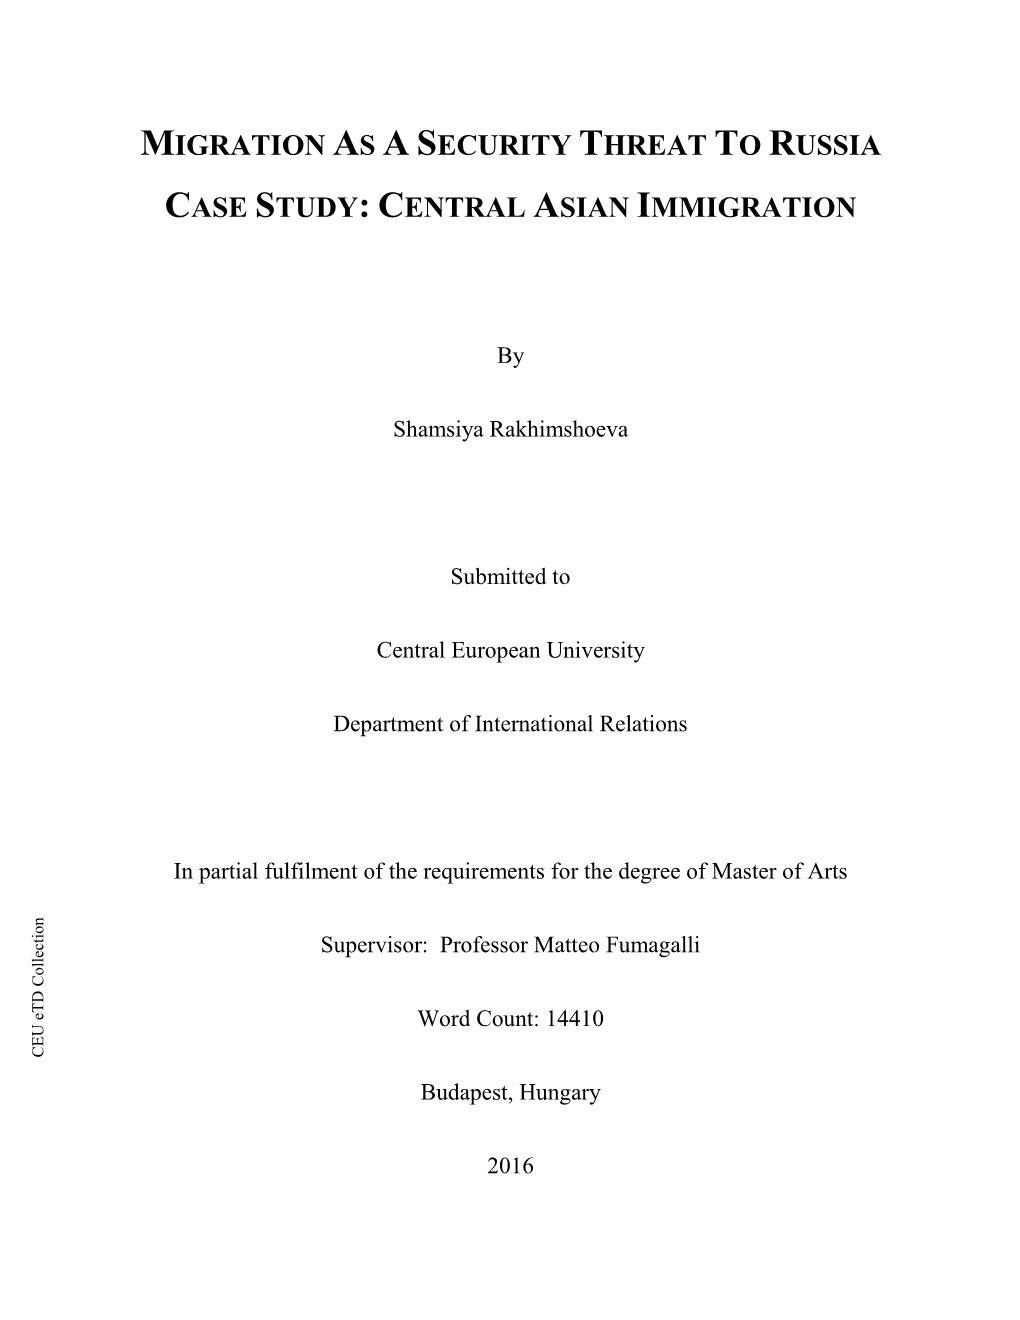 Migration As a Security Threat to Russia Case Study